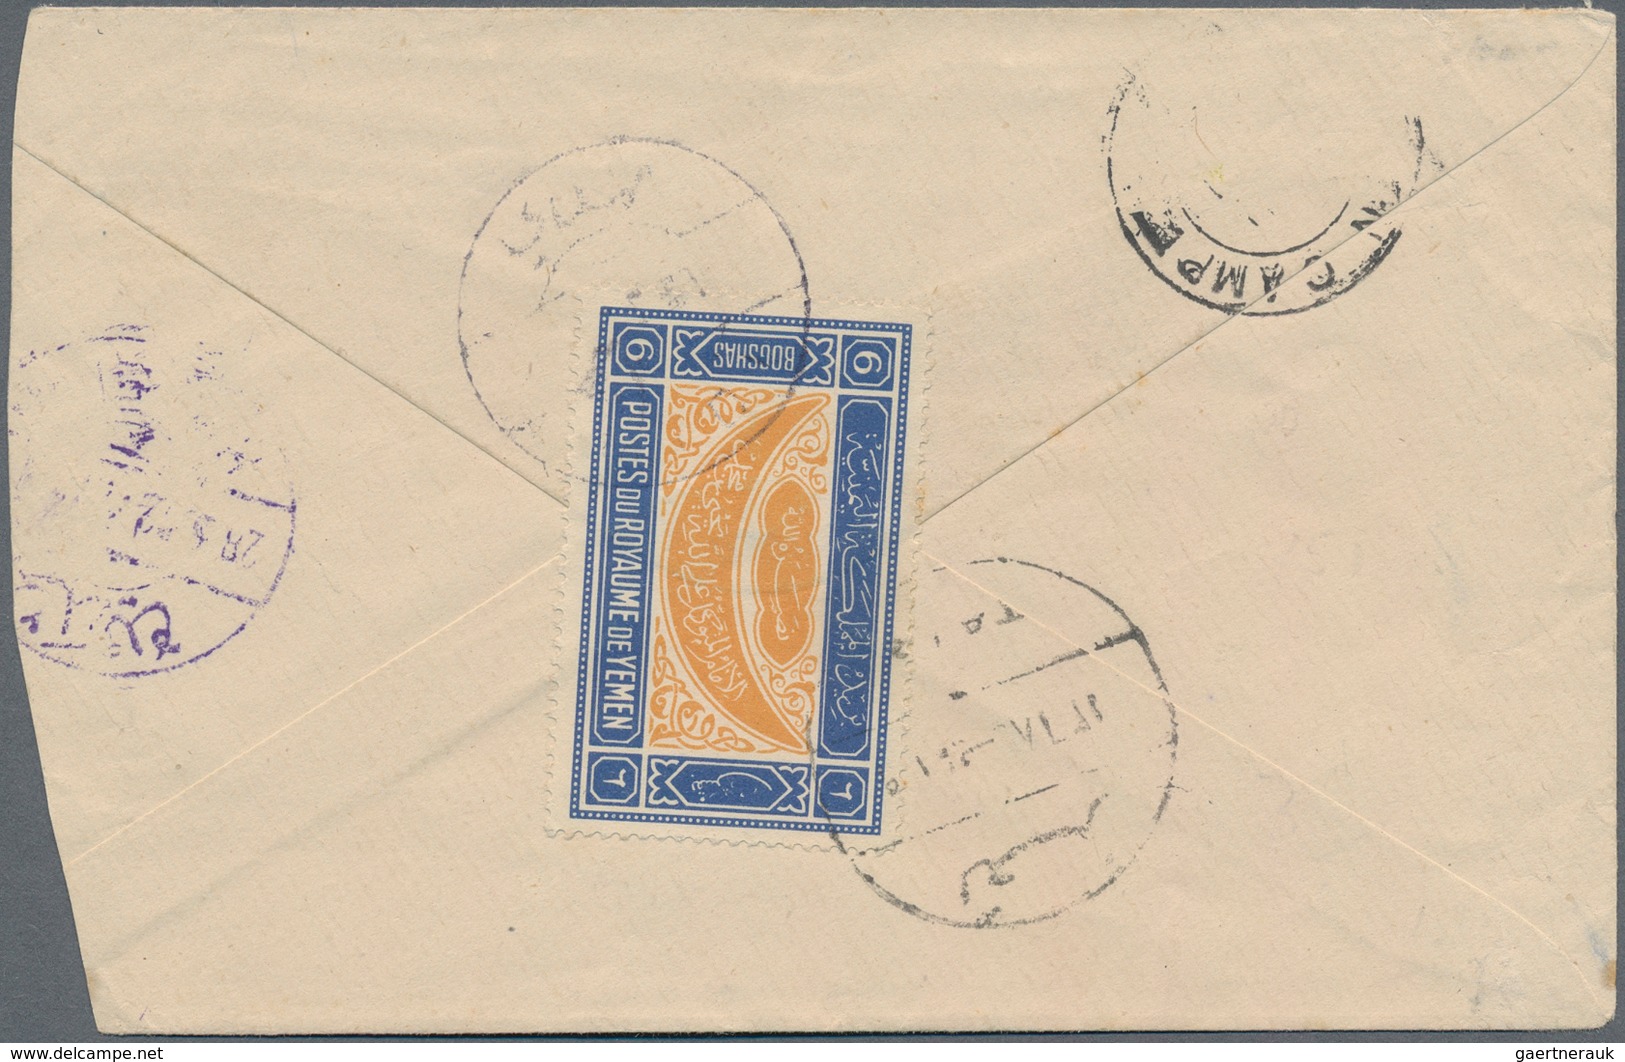 Naher Osten: 1920/1990 (ca.), lot of some loose stamps and mainly covers, comprising Yemen, Oman, Qa